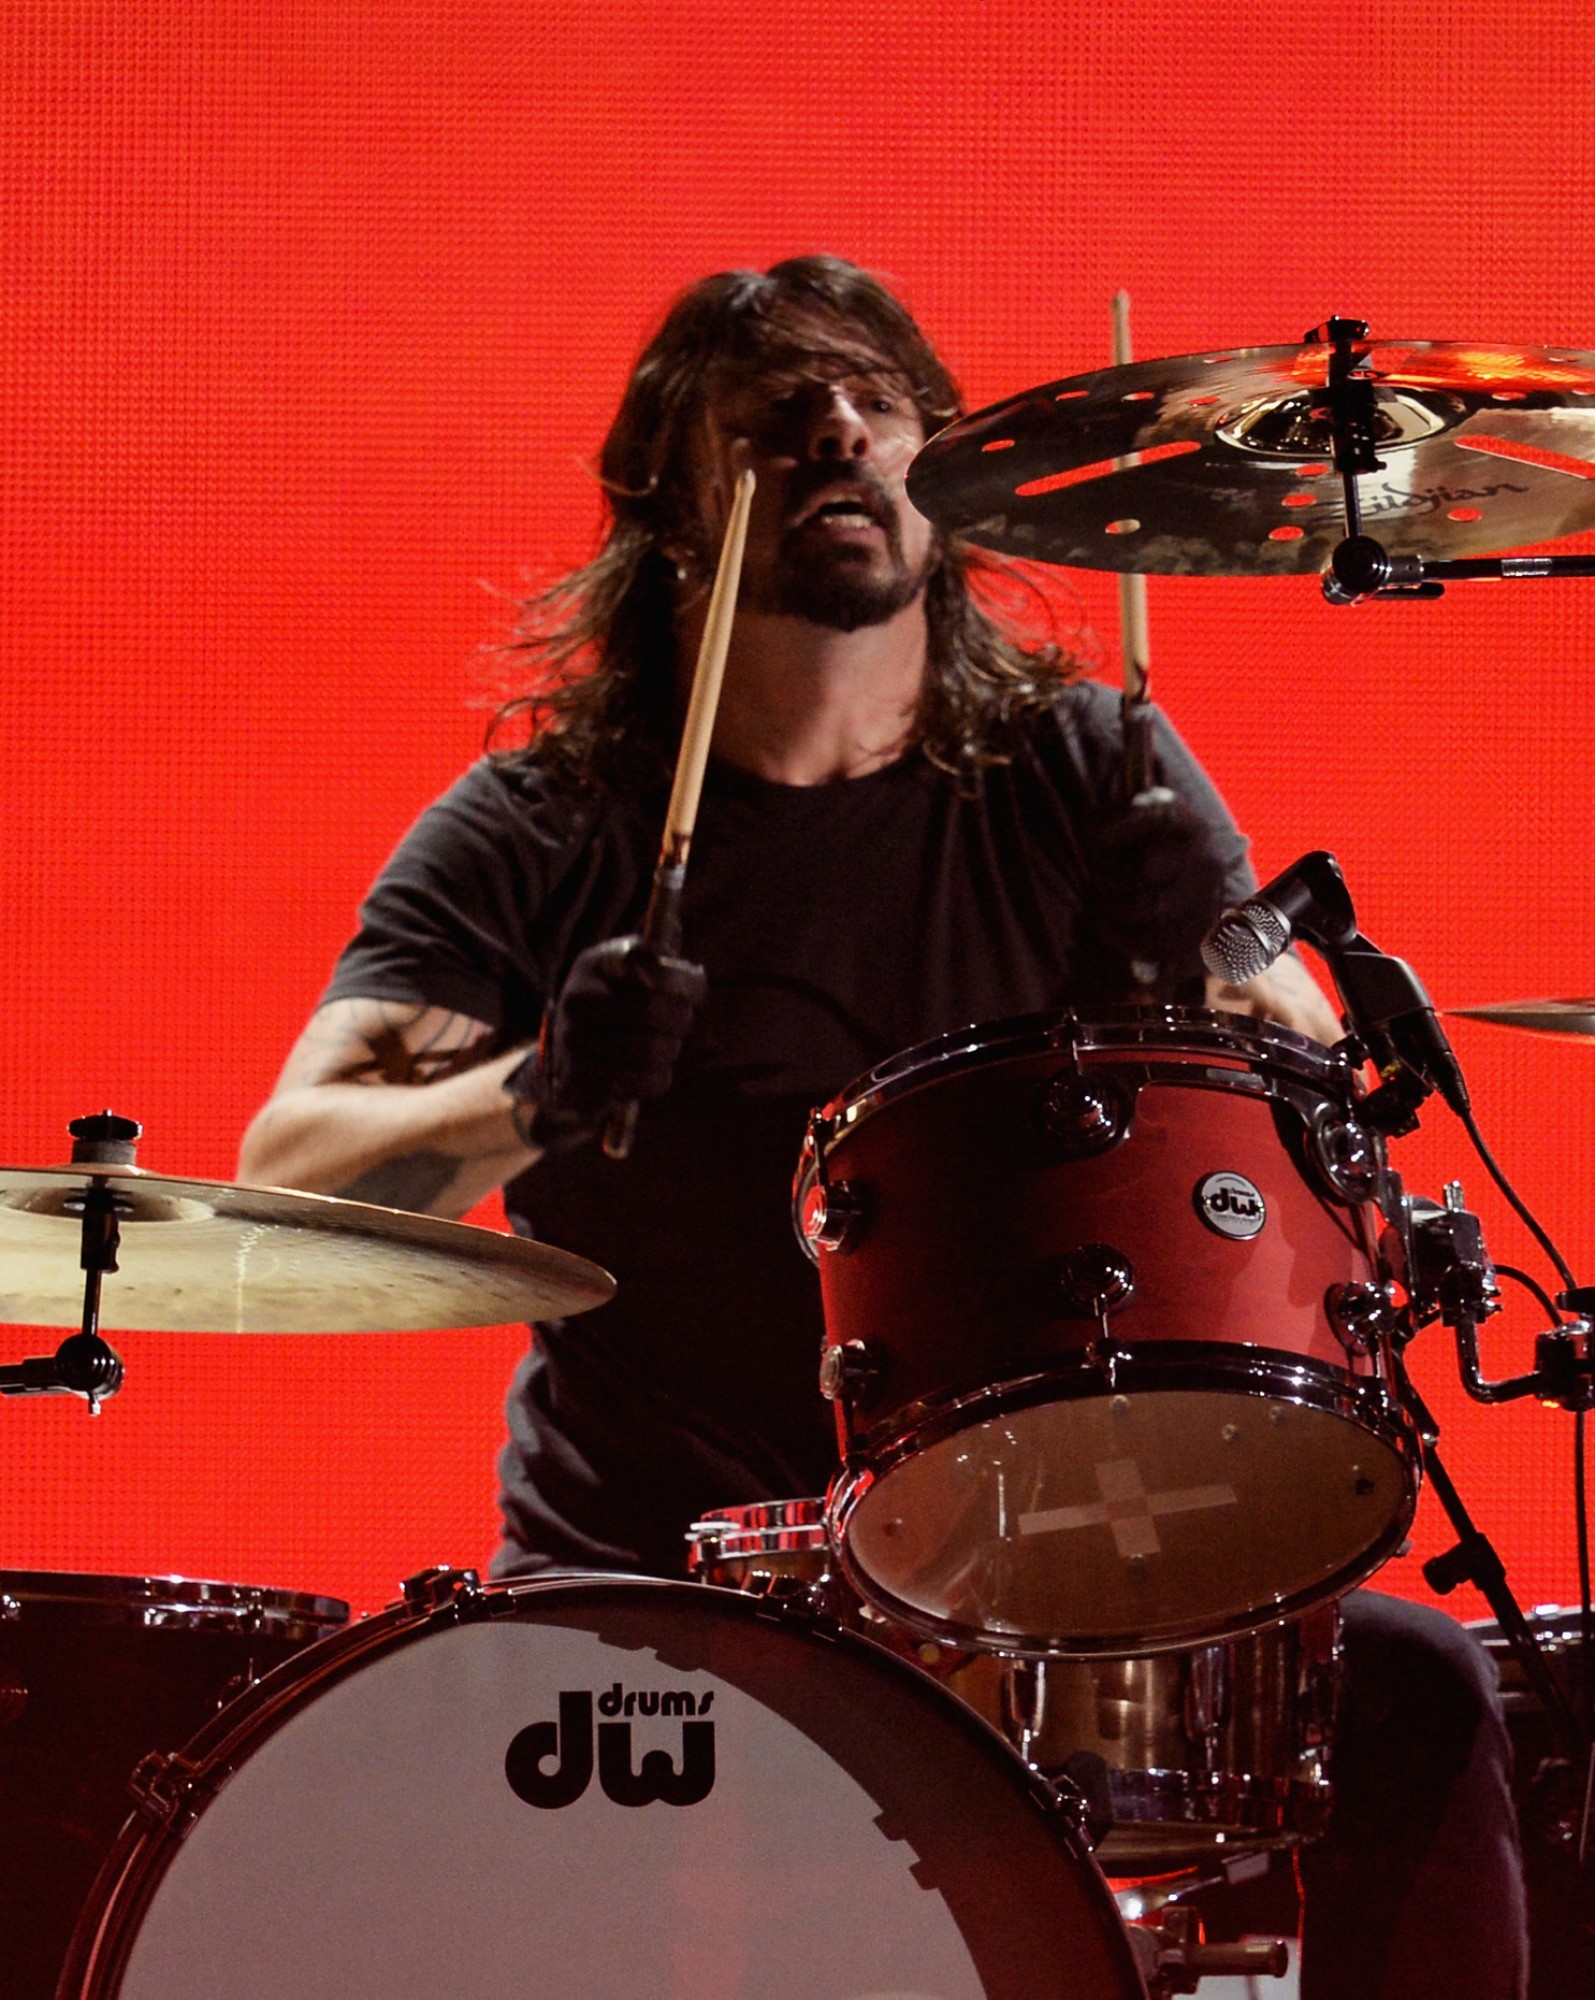 Grammys Grohl - Dave Grohl Grammys Drum - HD Wallpaper 